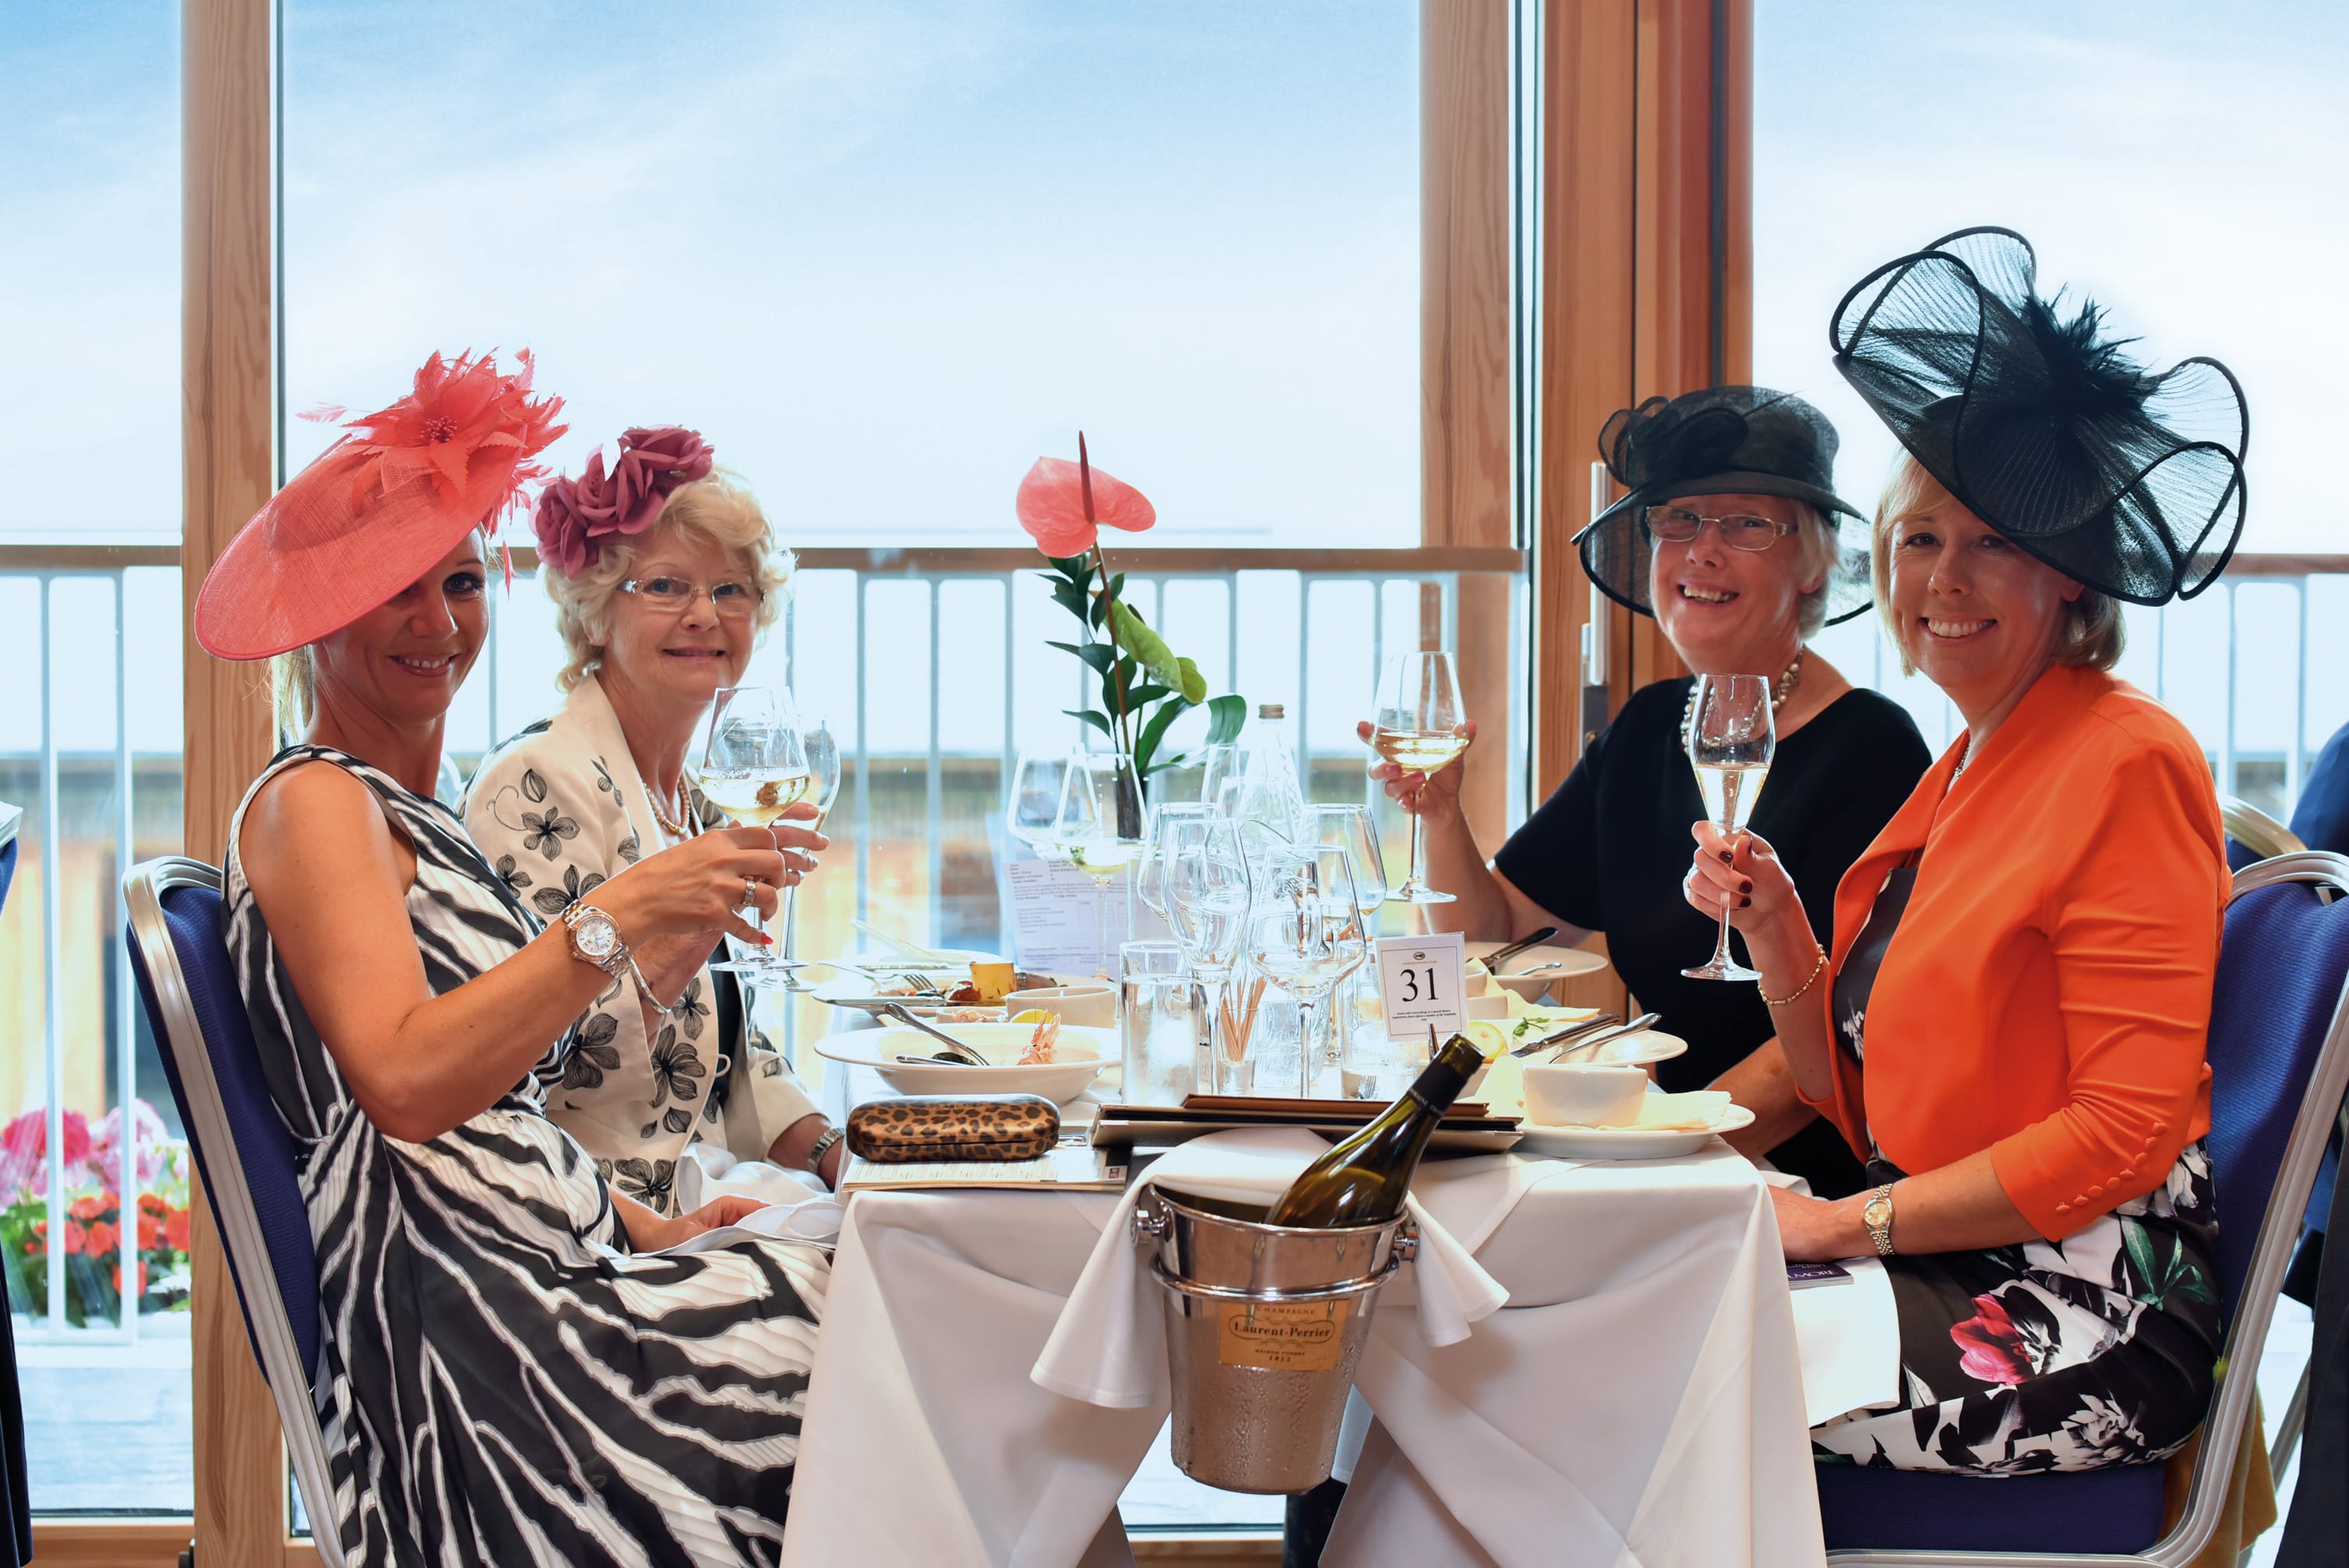 Ladies enjoy catering and refreshments with Parade Ring Restaurant hospitality 